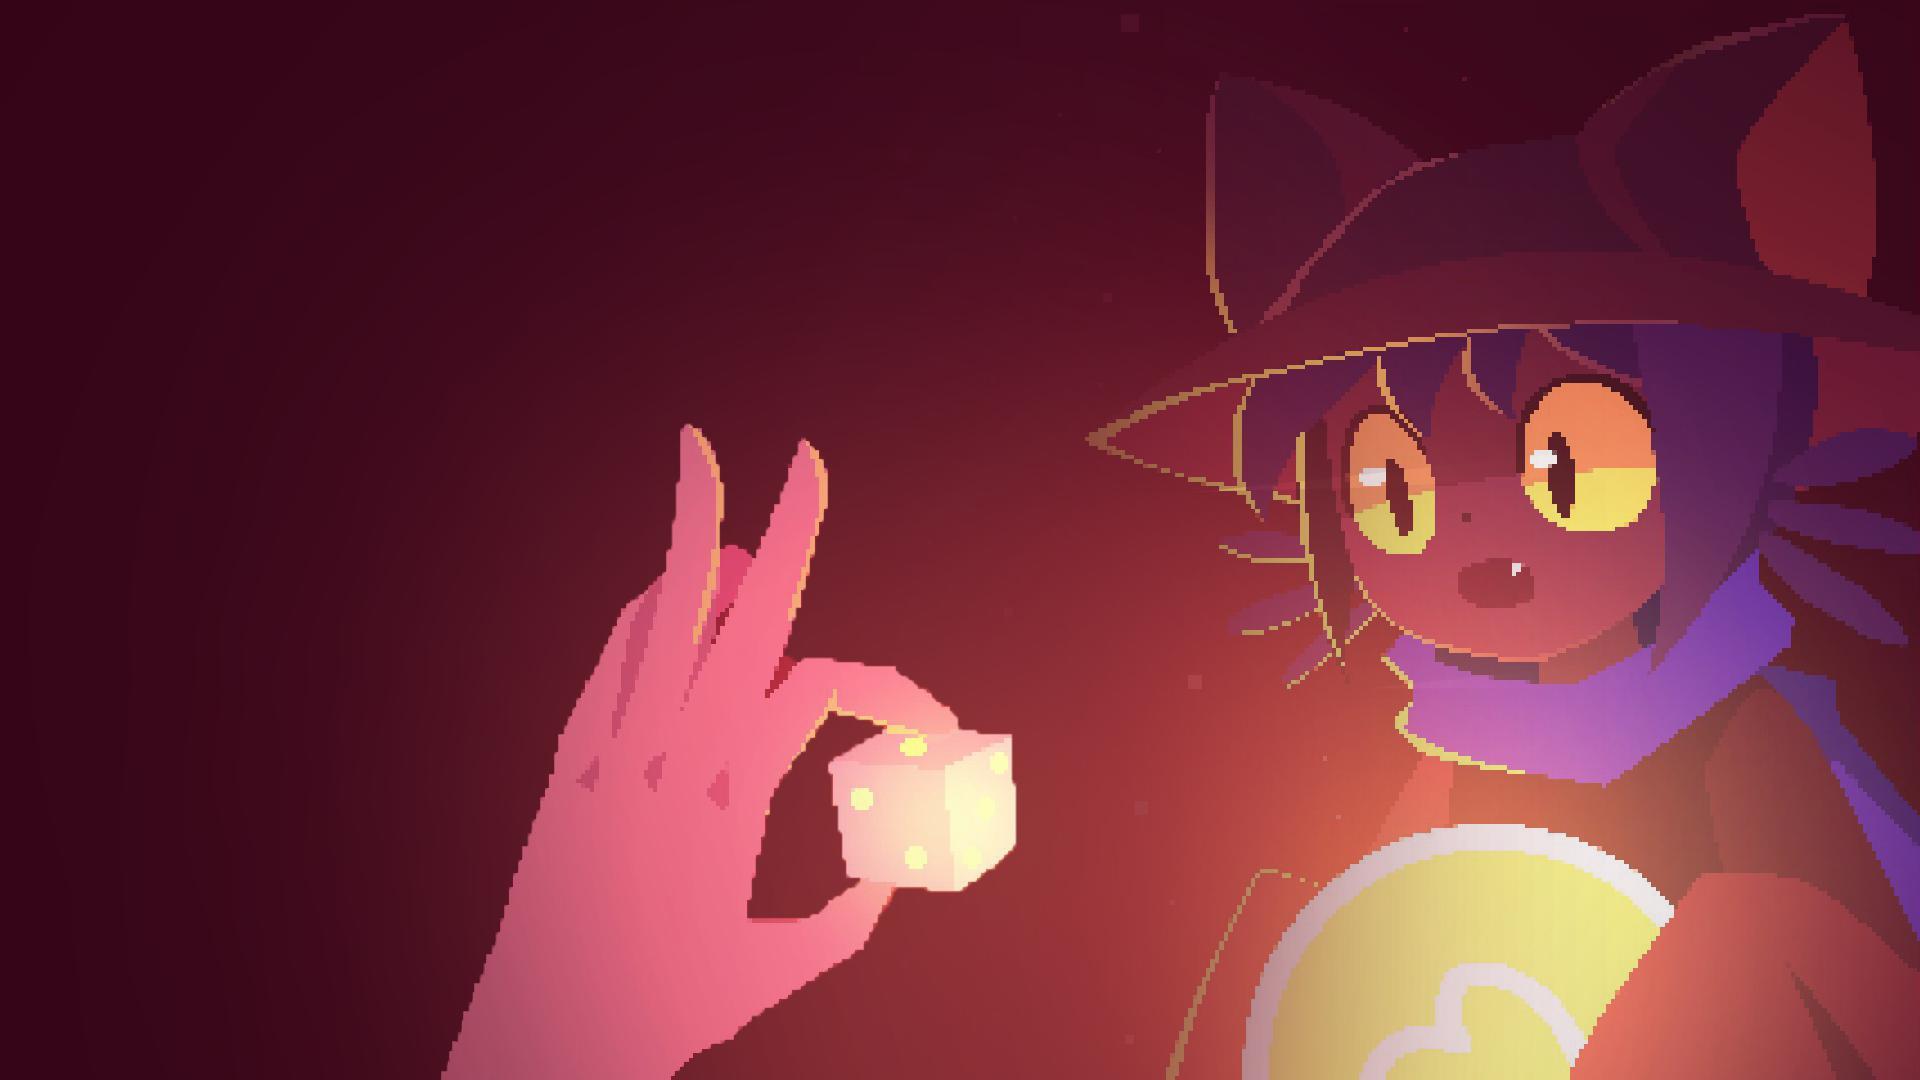 Made Some Wallpaper From Oneshot Niko, HD